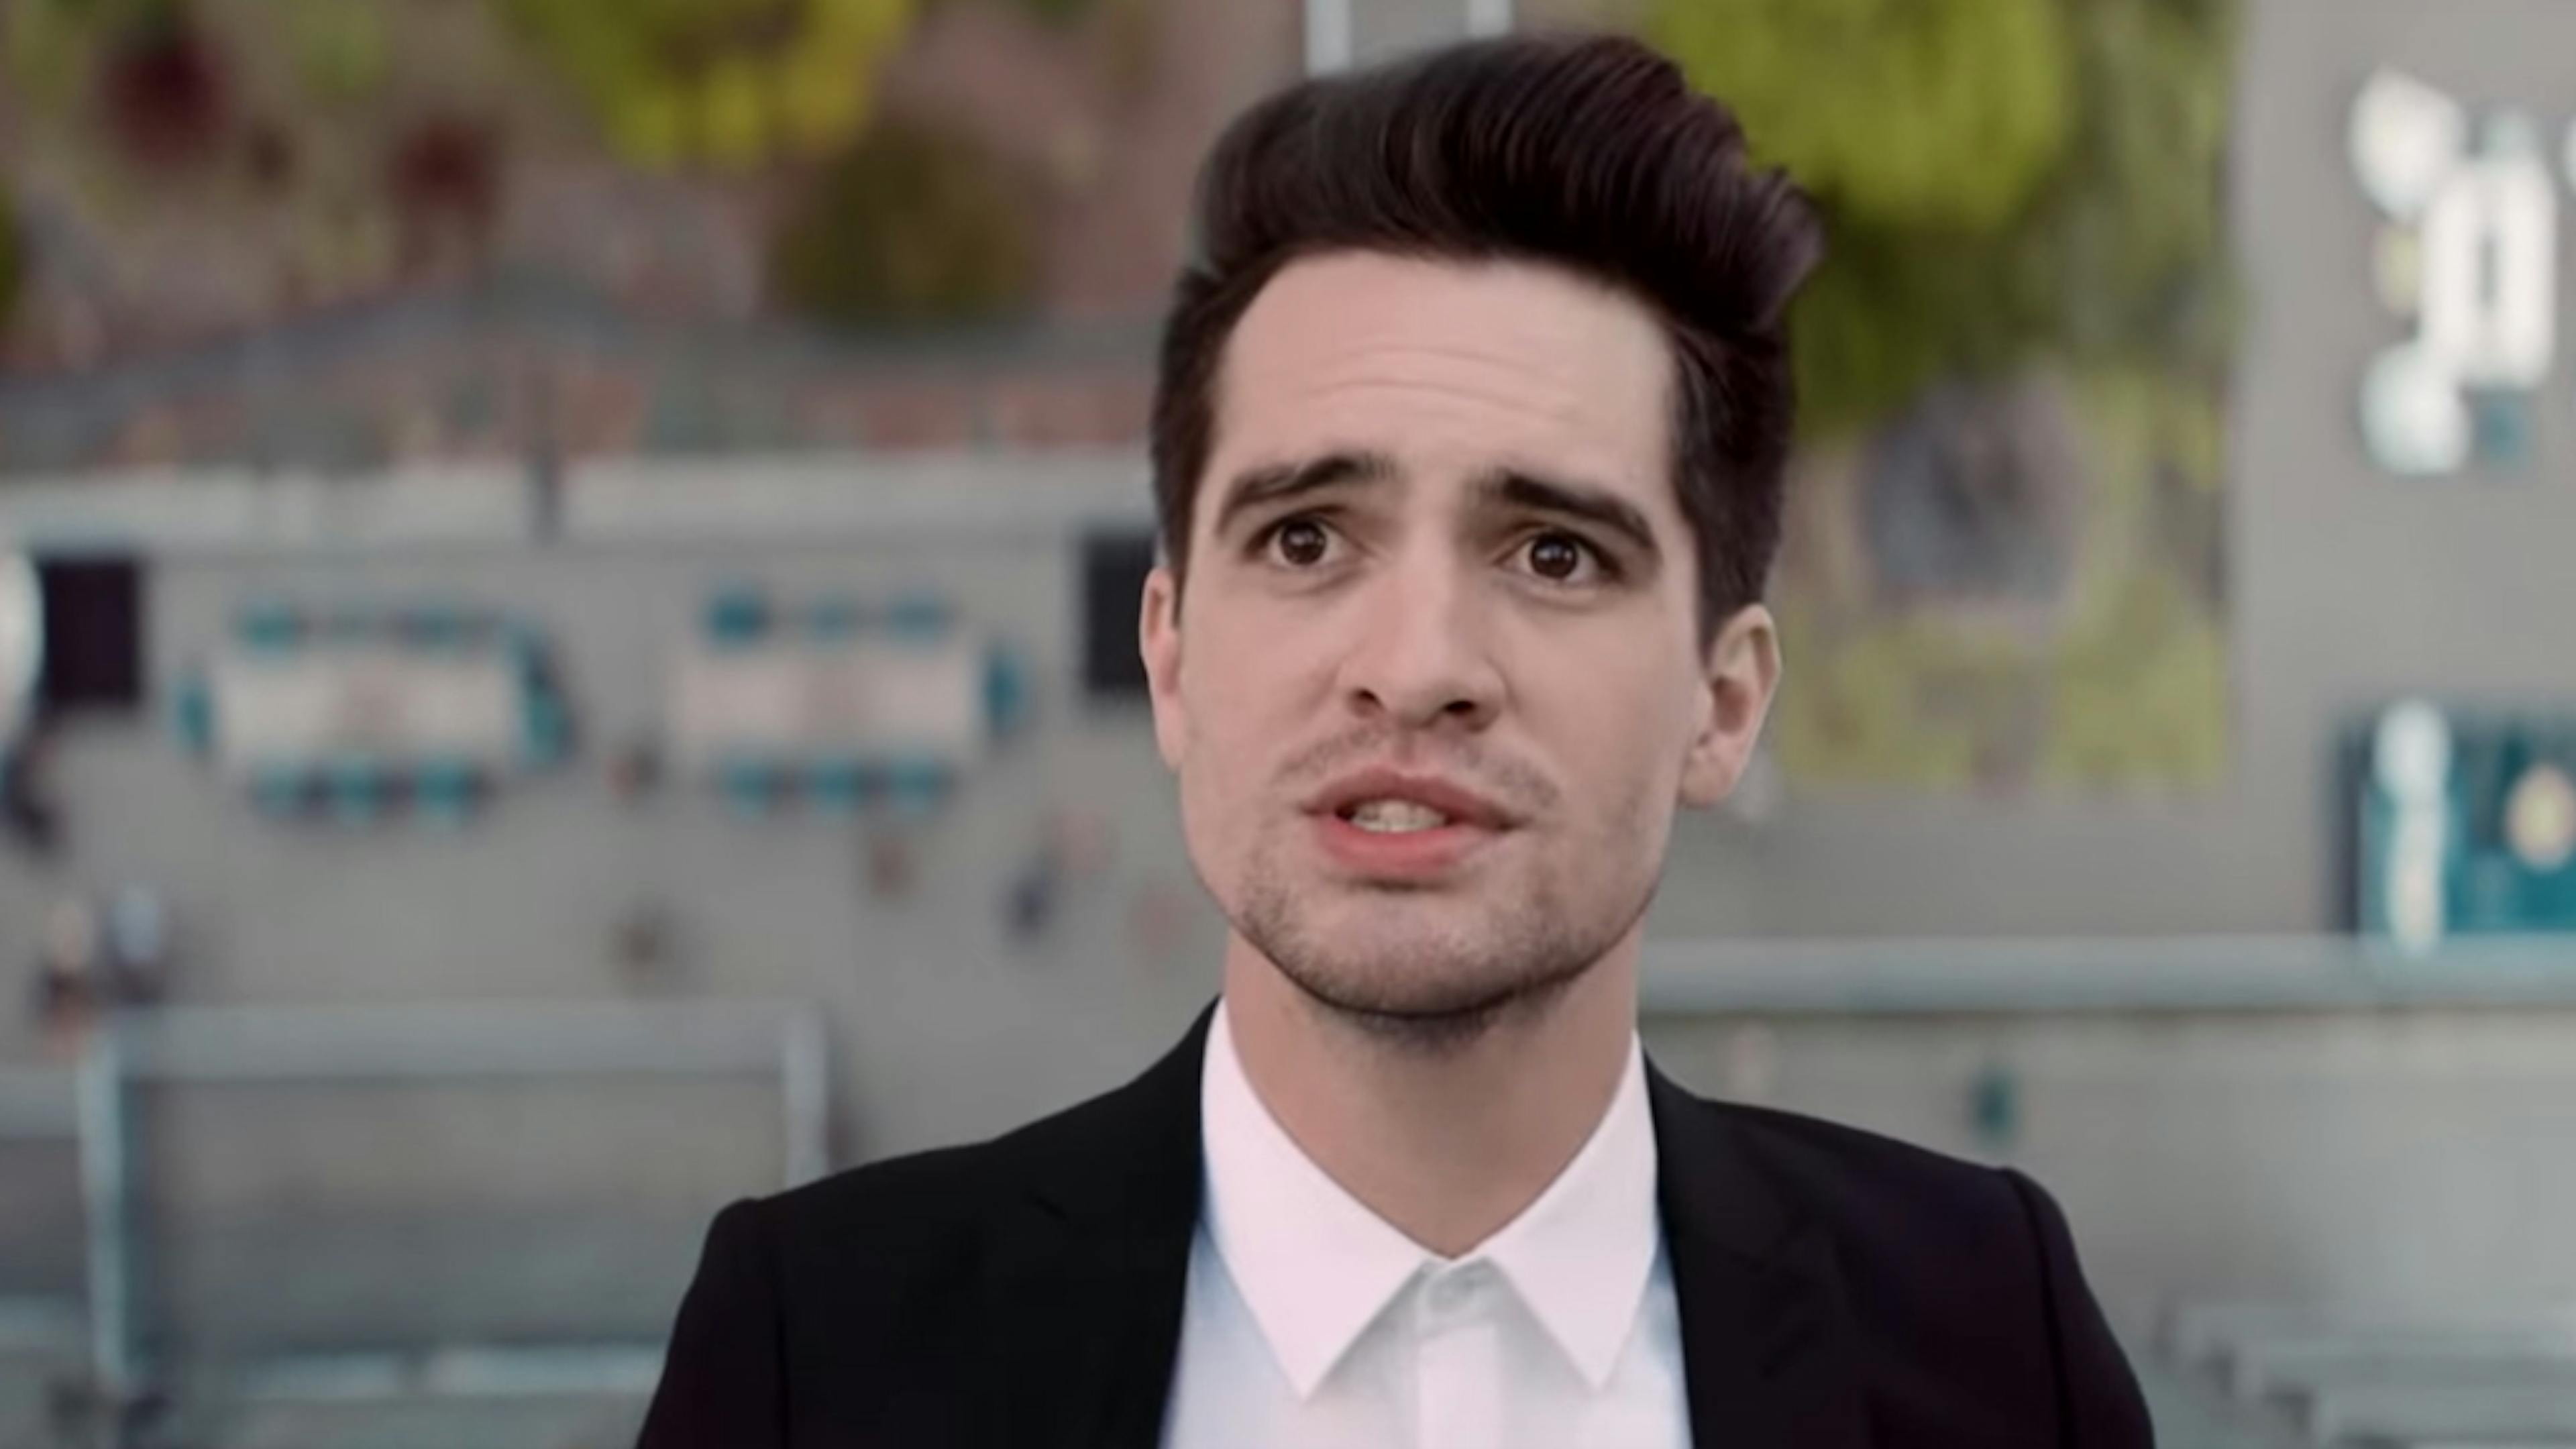 Panic! At The Disco's High Hopes Becomes Longest-Leading Number One Single In 10 Years